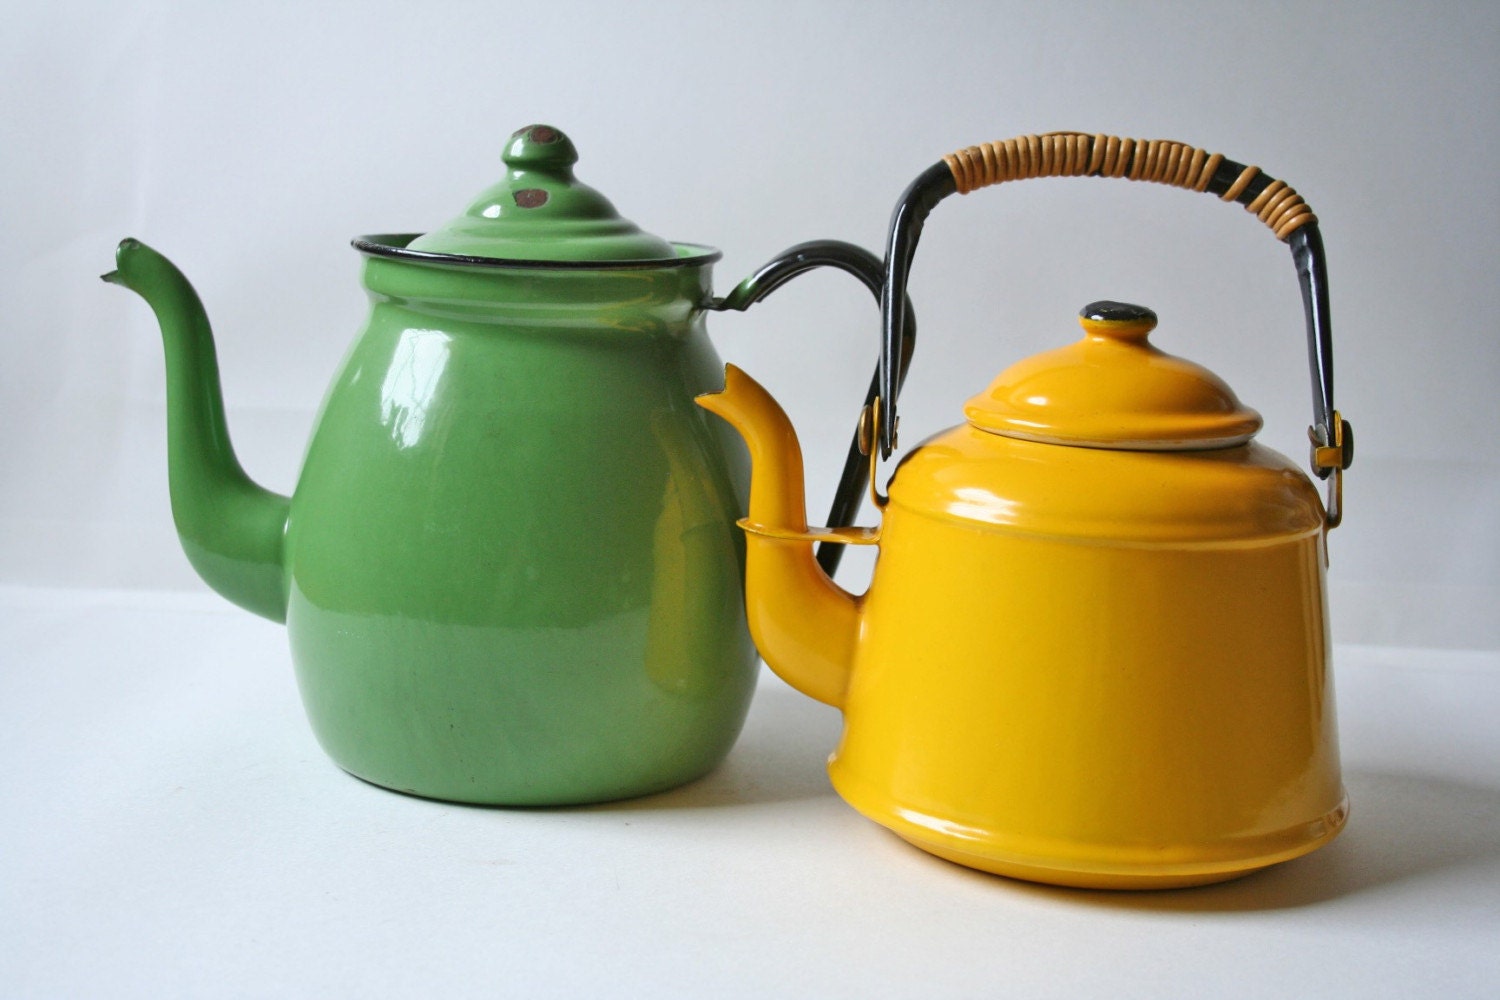 two vintage enamelware tea kettle in yellow and light green